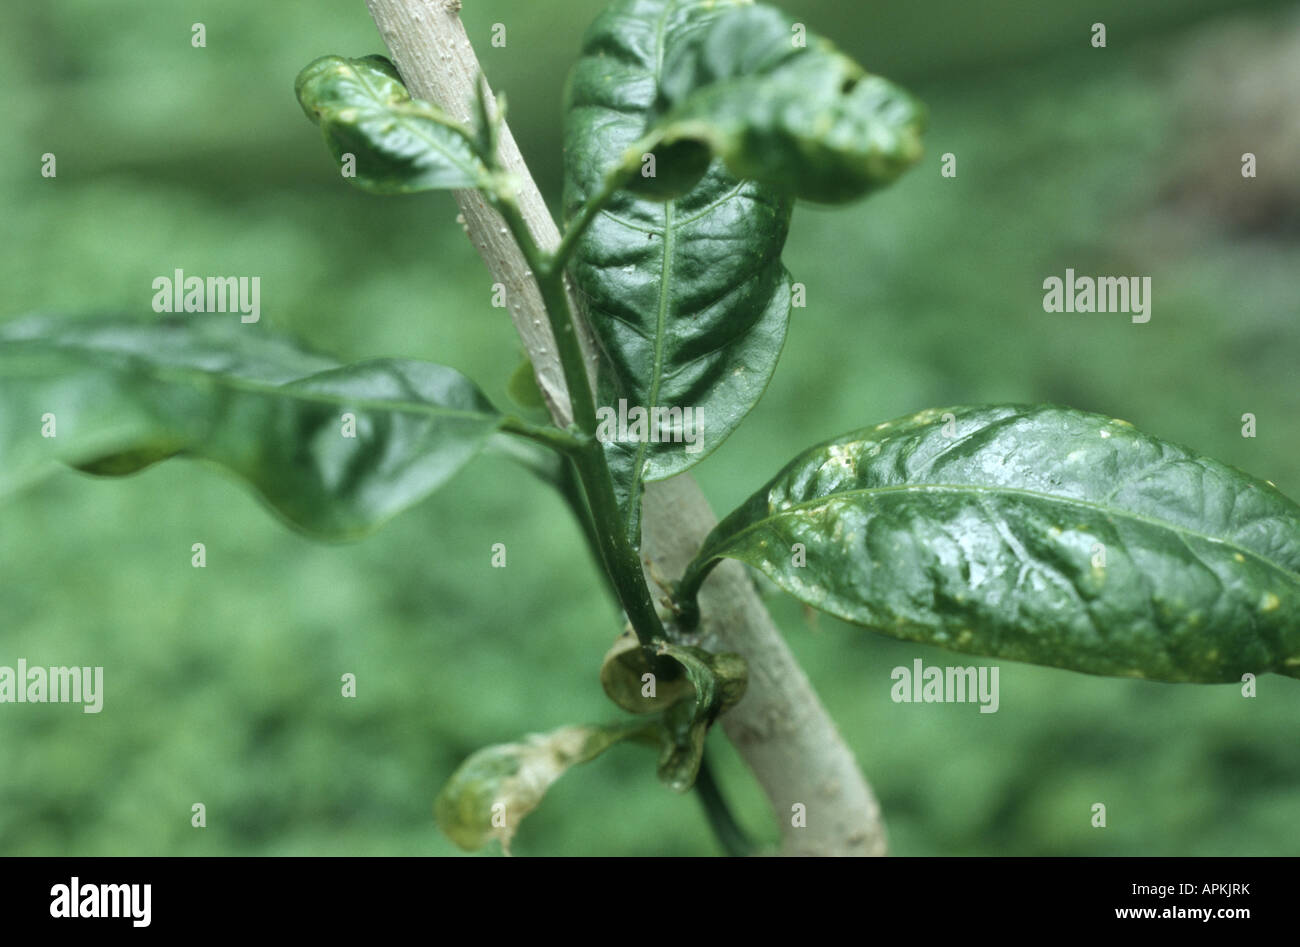 Western soapberry, Soapberry (Sapindus saponaria), shoot with leaves Stock Photo